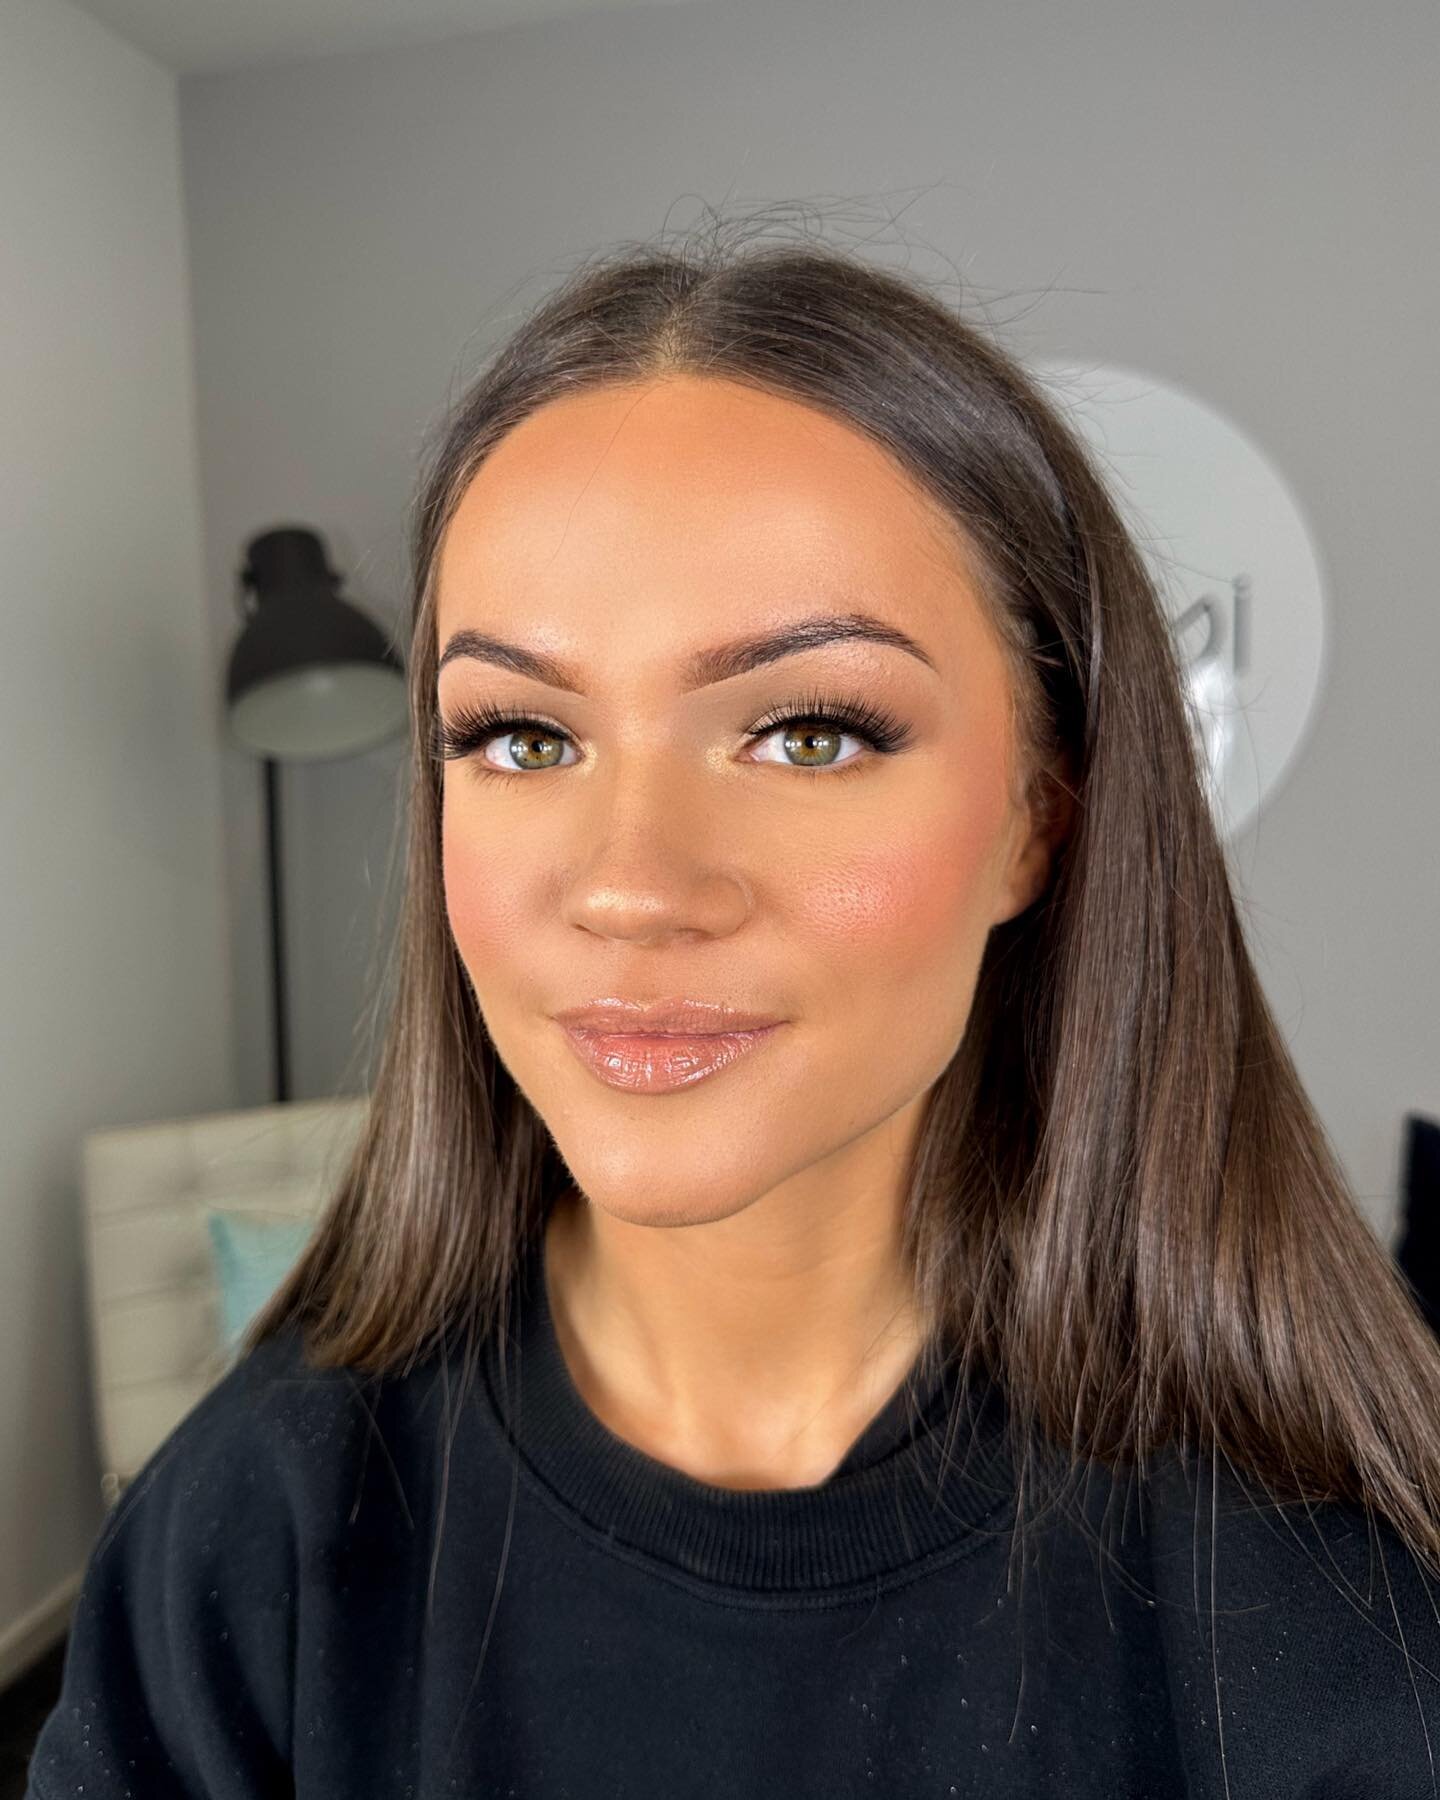 @maddycornford looking 12/10 pre show debut 😍

I have very few appointments left for the season so get in asap!

www.makeupatgigi.com

#Mua #MakeupArtist #Makeup